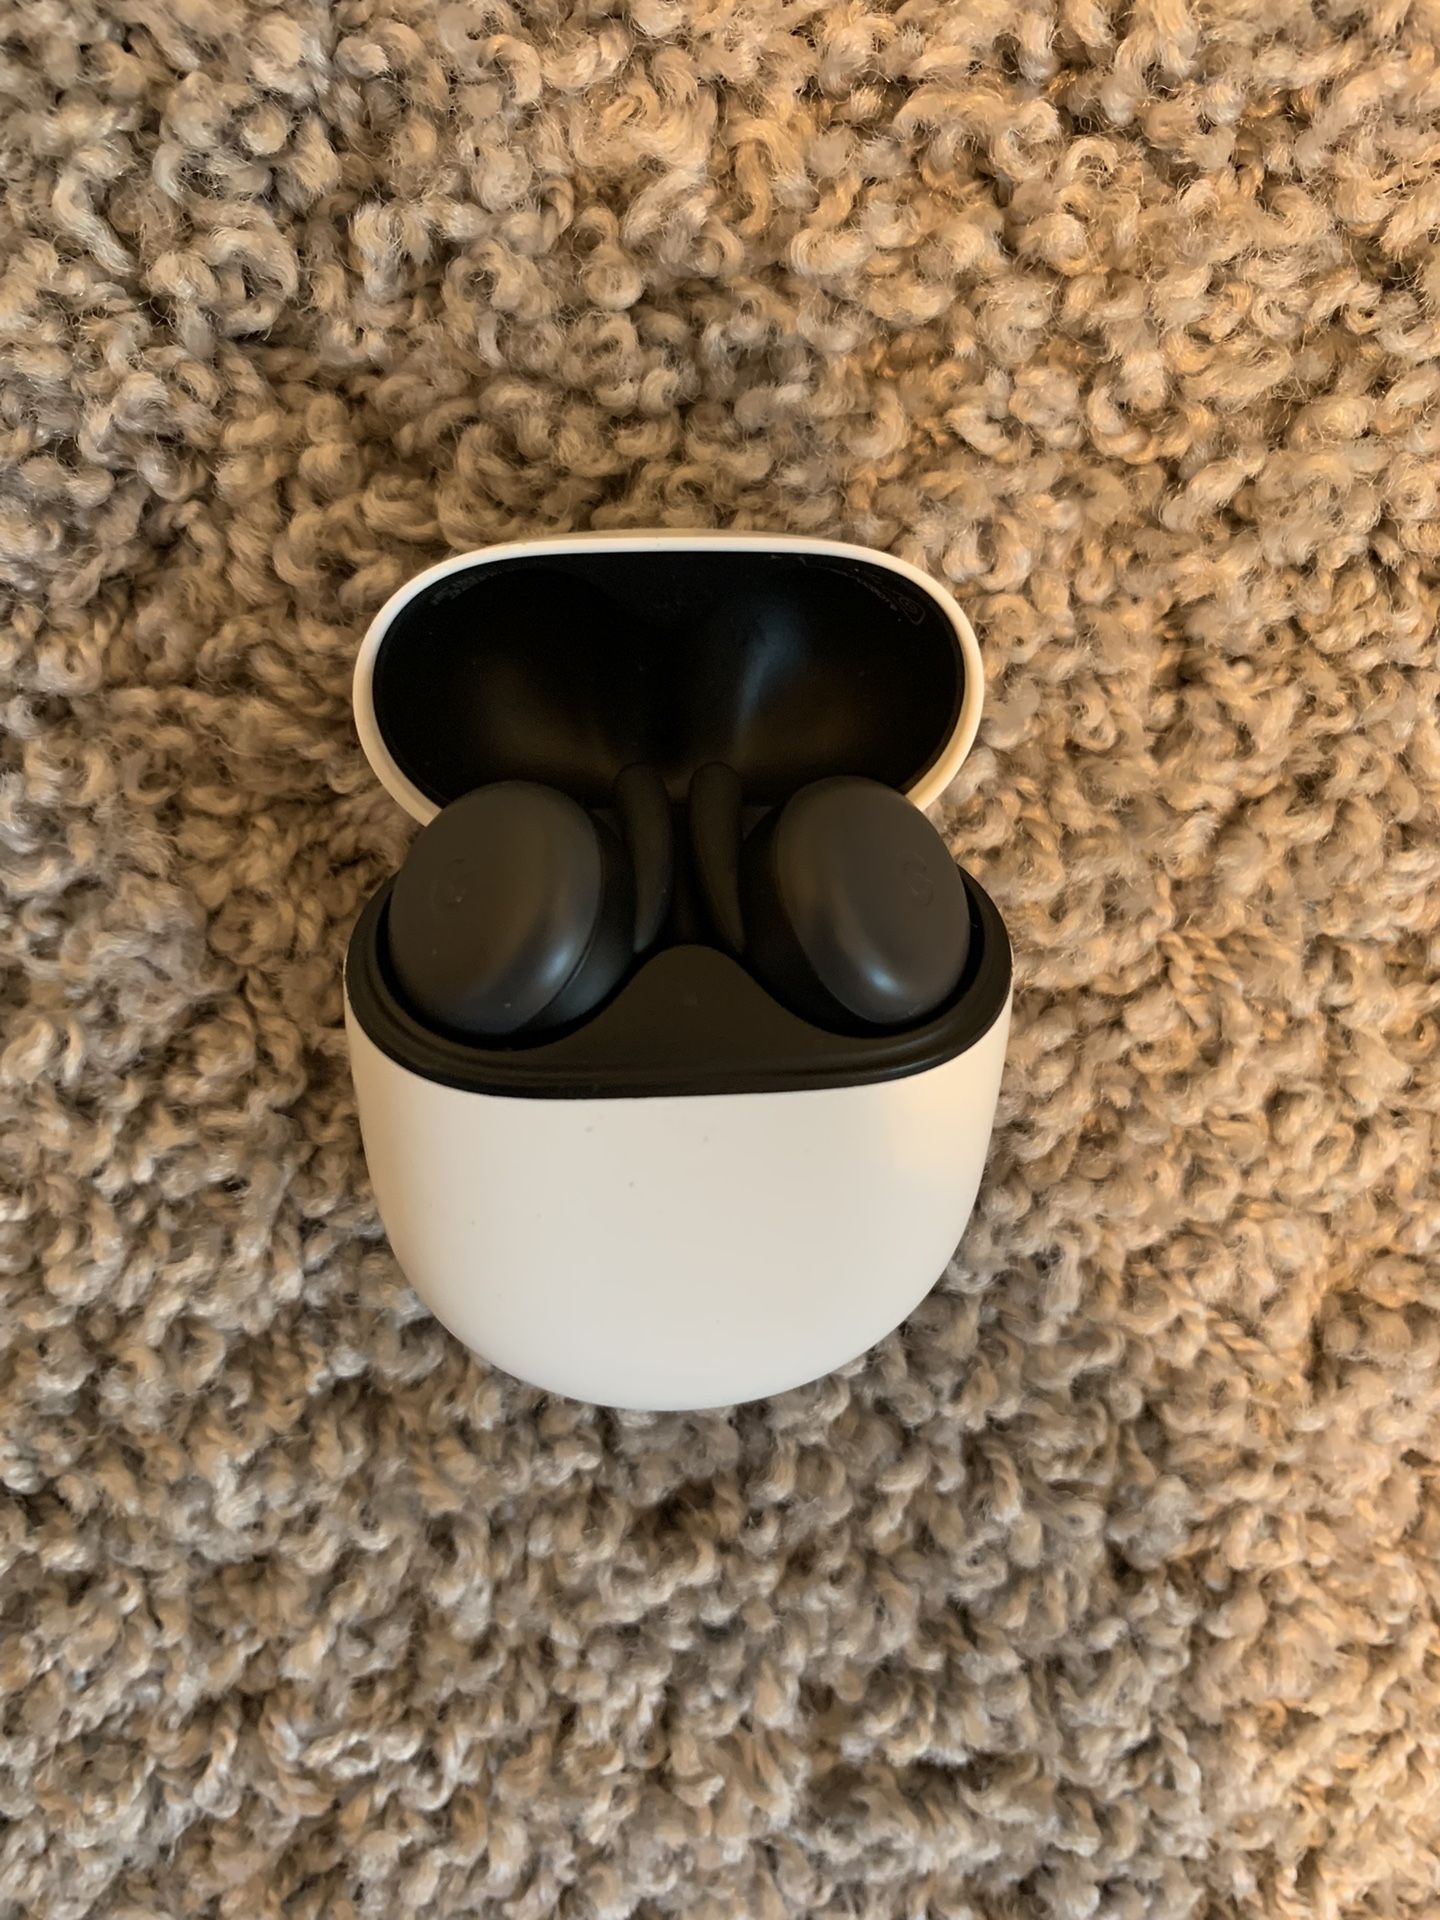 Used Google Pixel Buds - Possibly Not Working